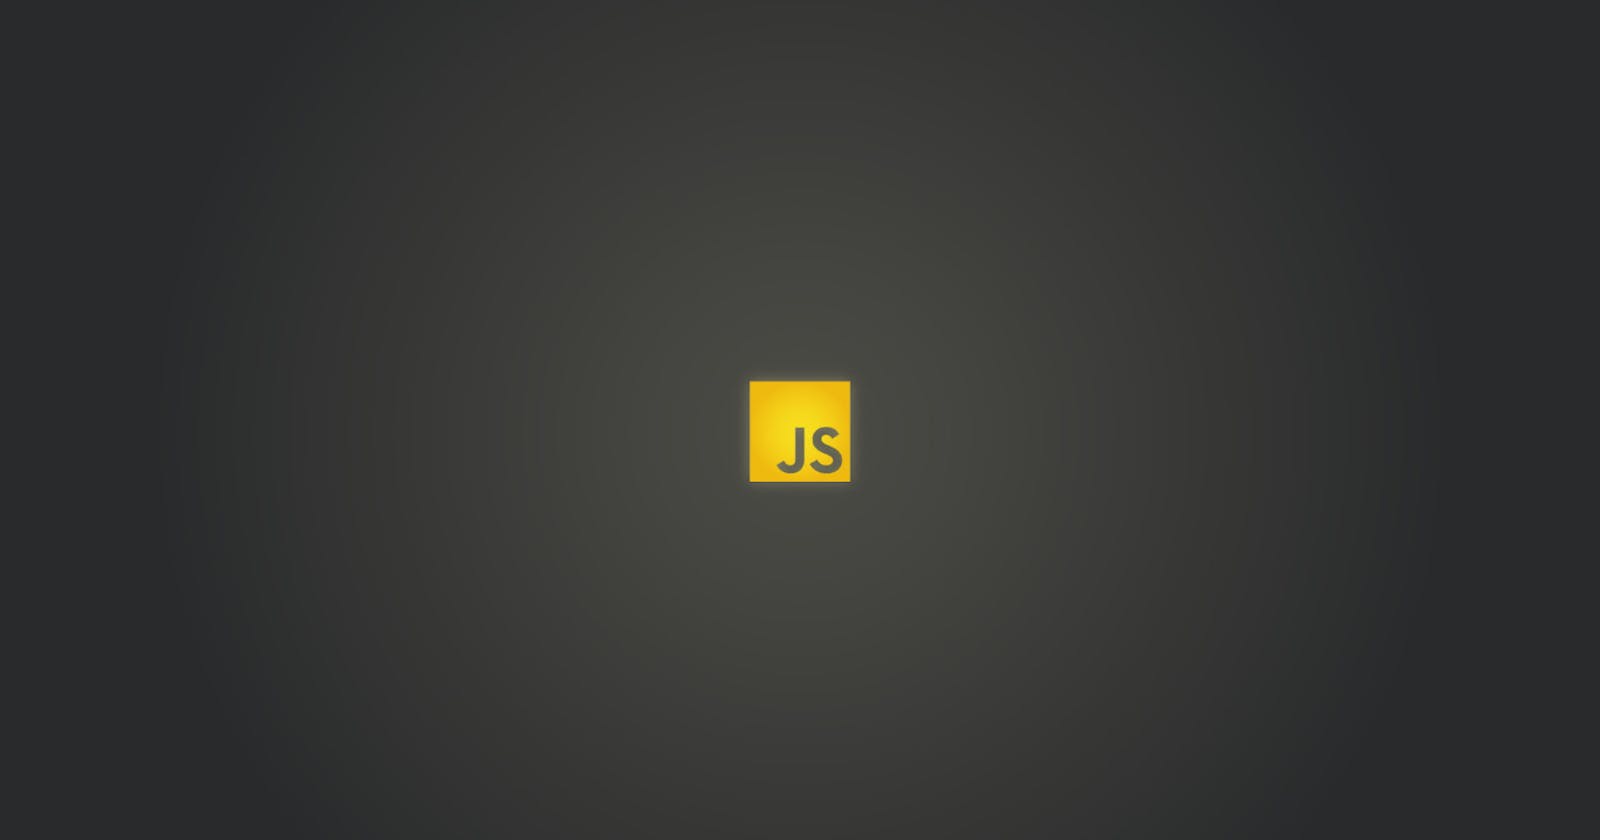 3 new JavaScript features and their syntax.